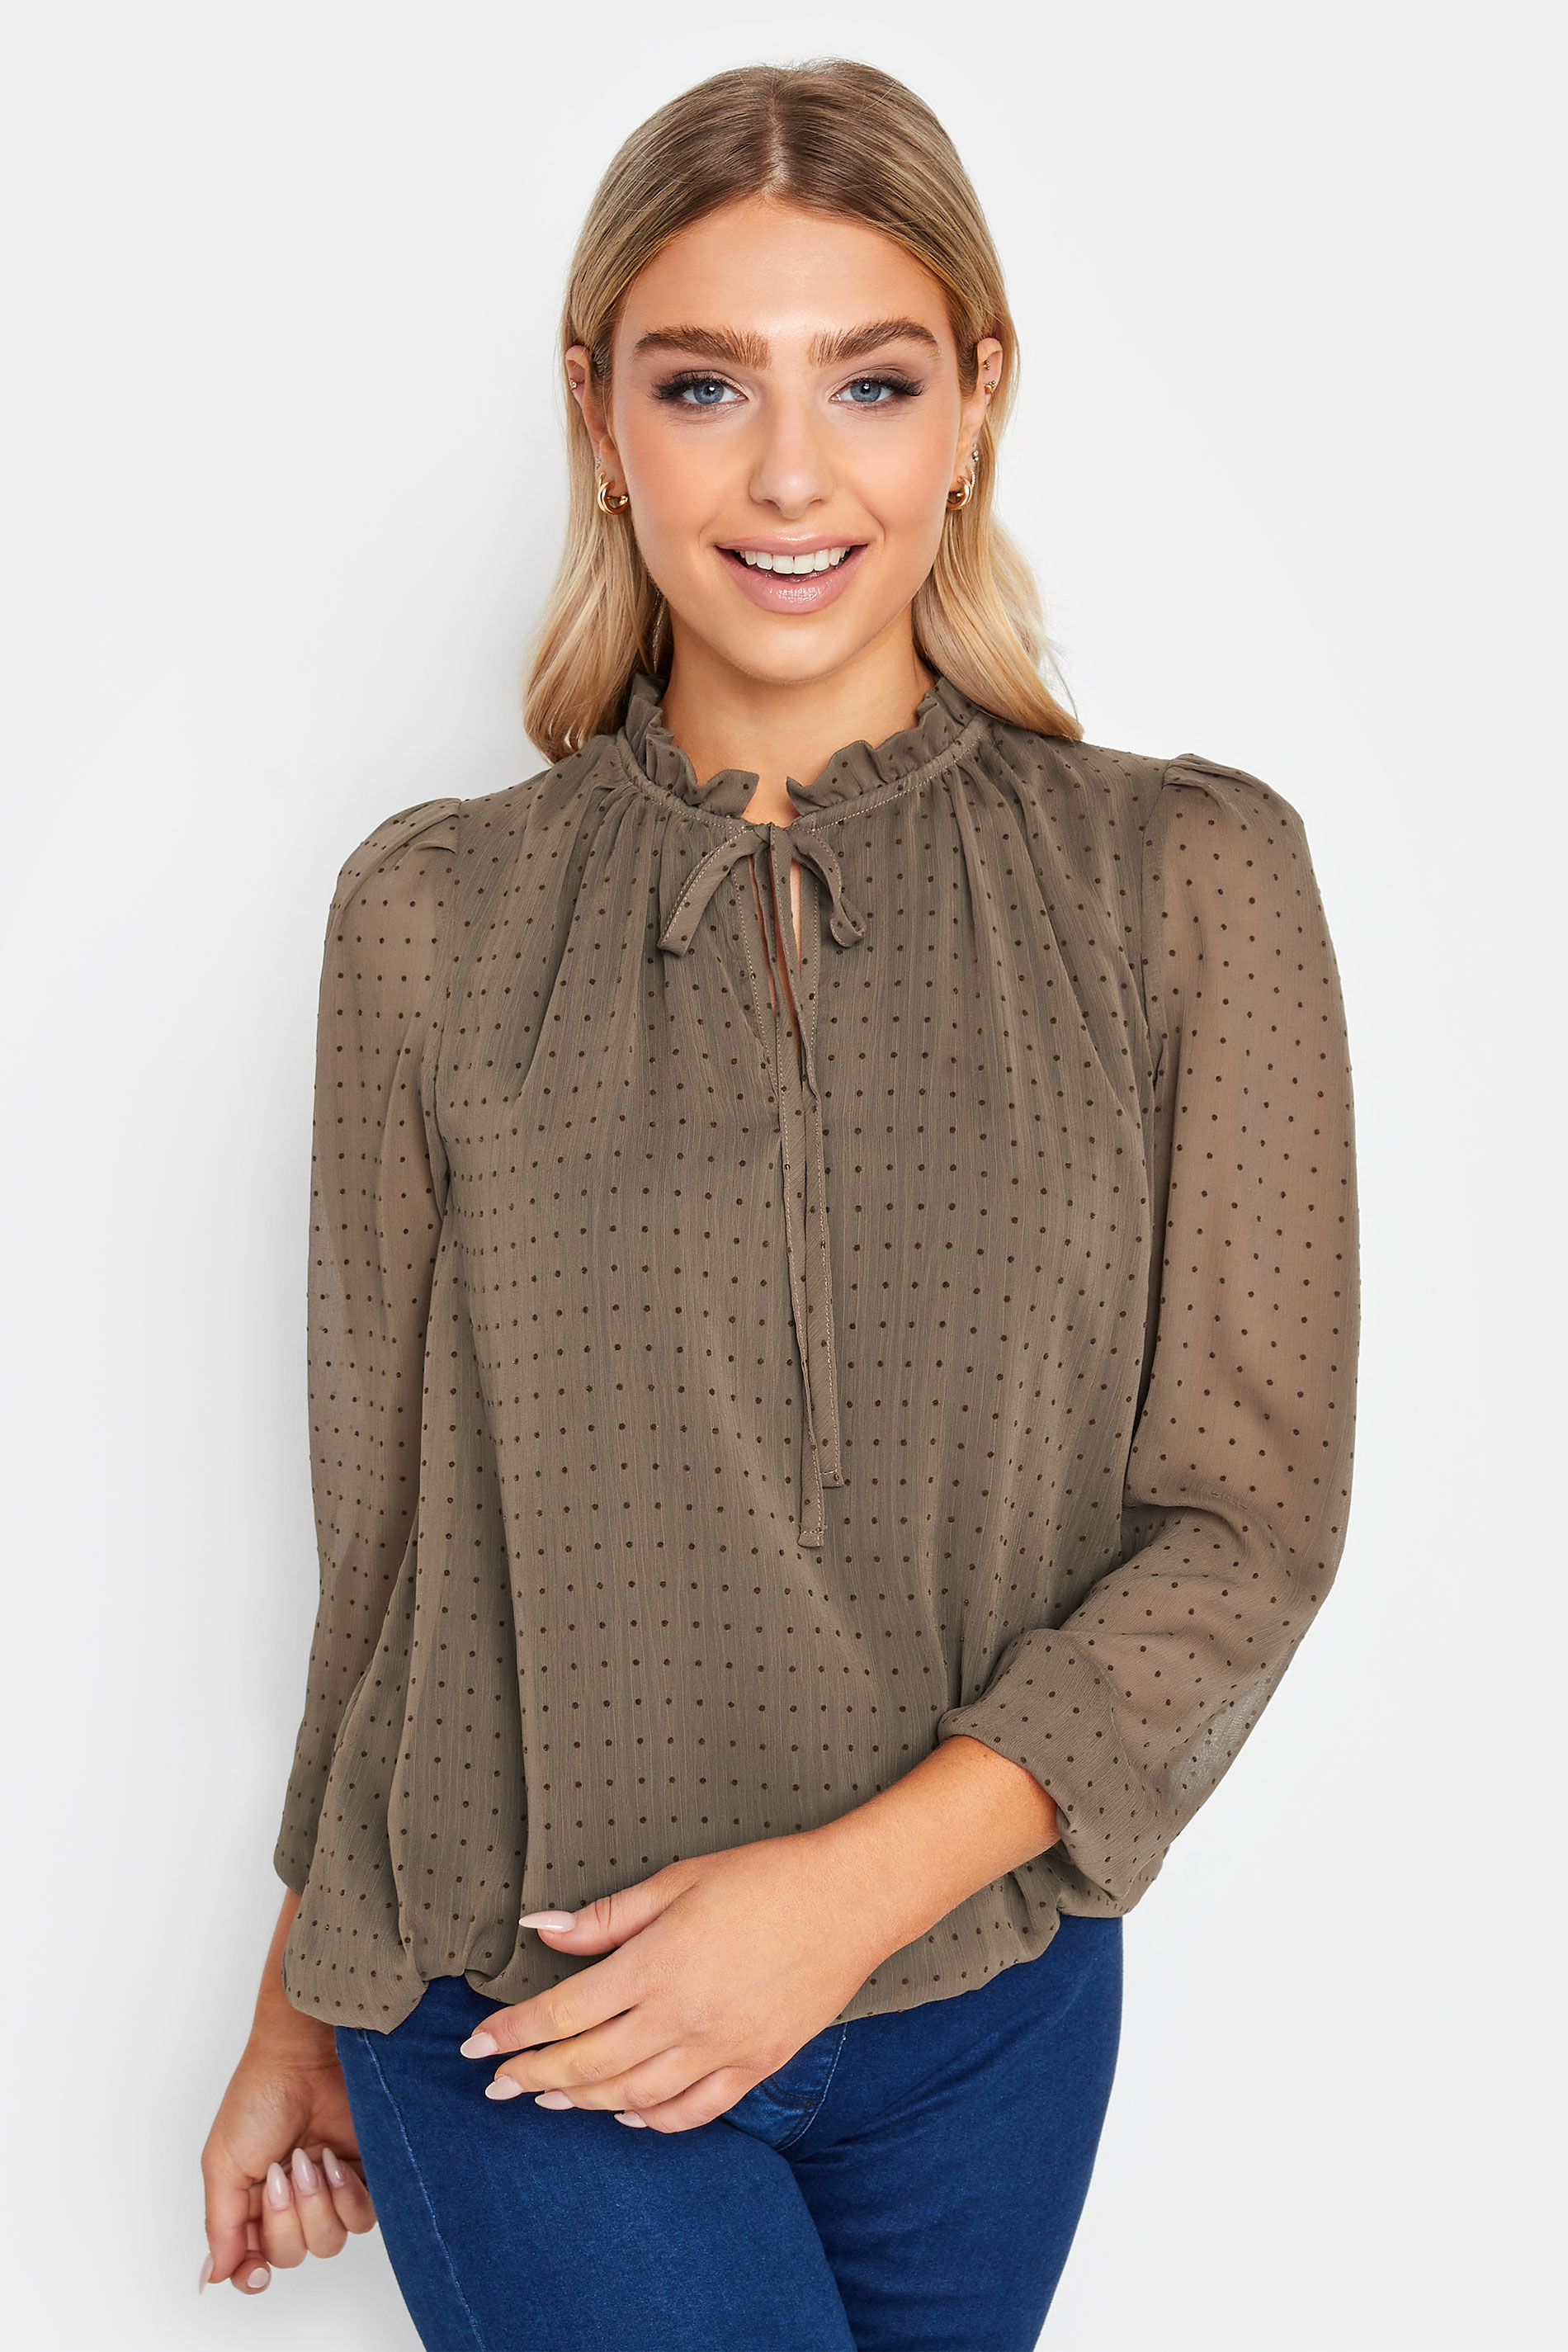 M&Co Brown Dobby Tie Neck Blouse | M&Co 1